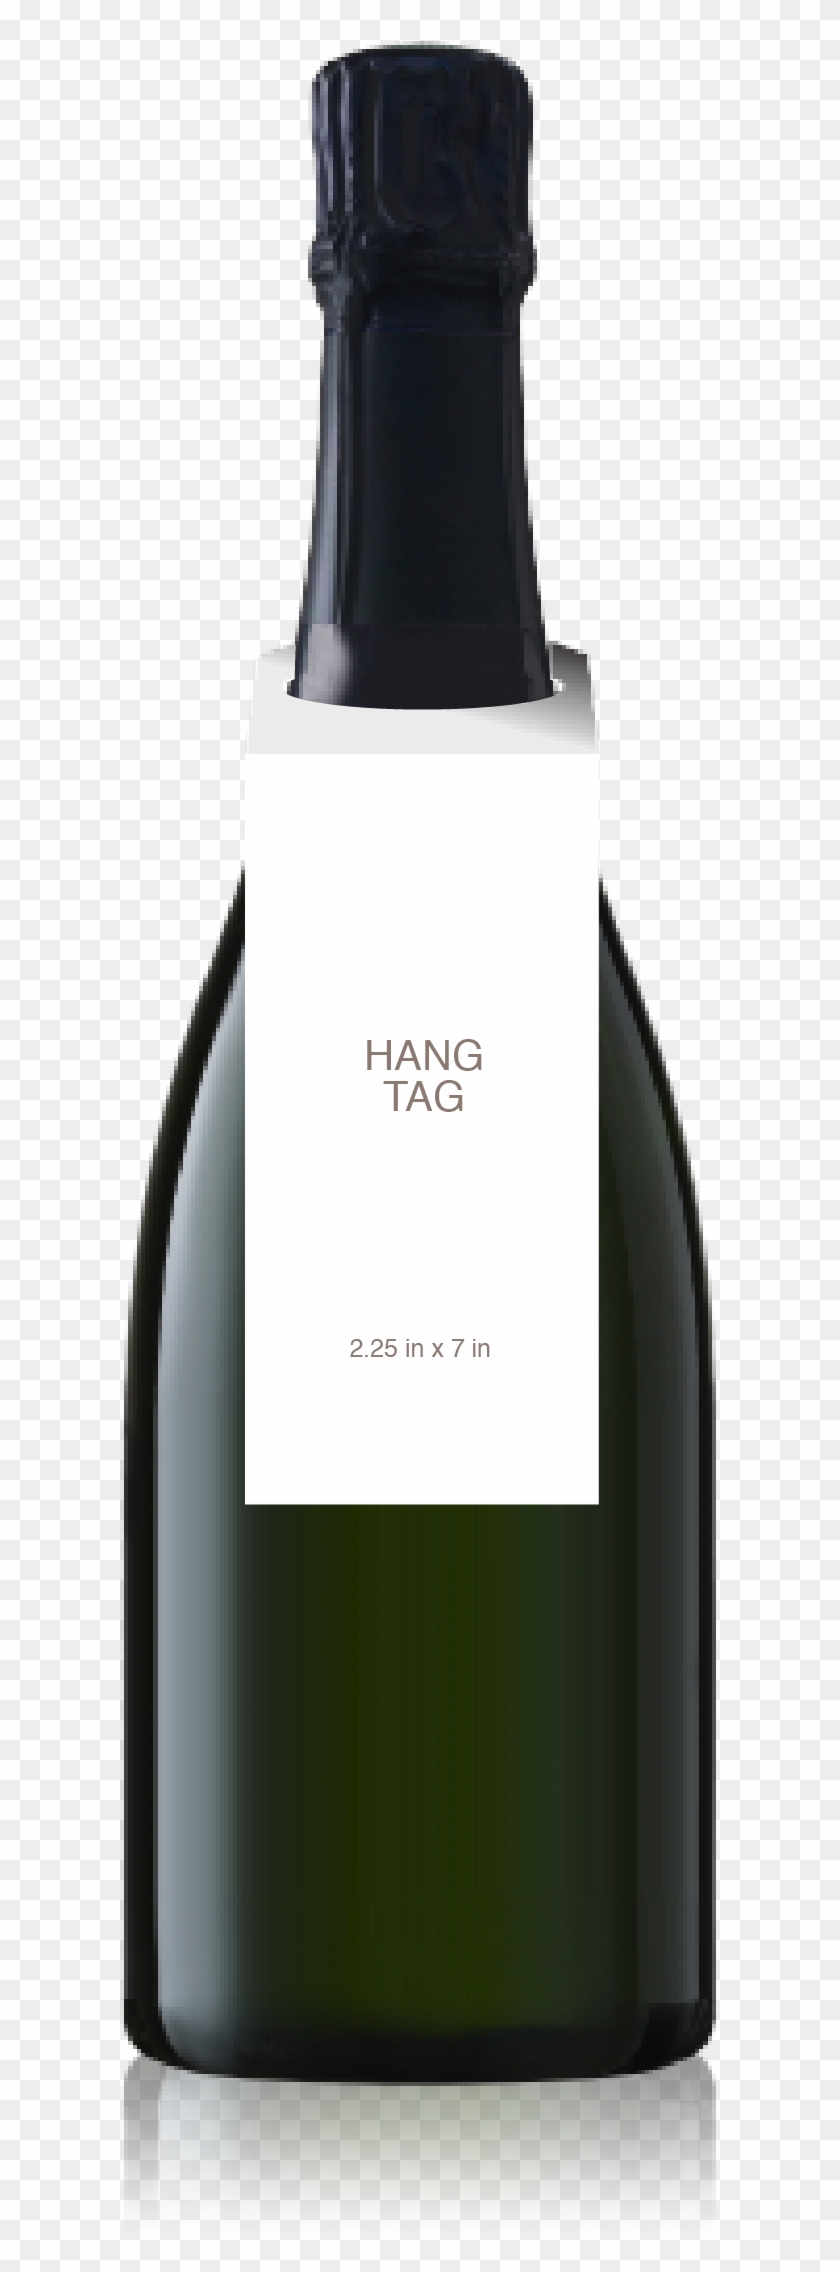 Champagne Bottle With A Blank Hangtag From Crushtag - Wine Bottle Neck Tag Clipart